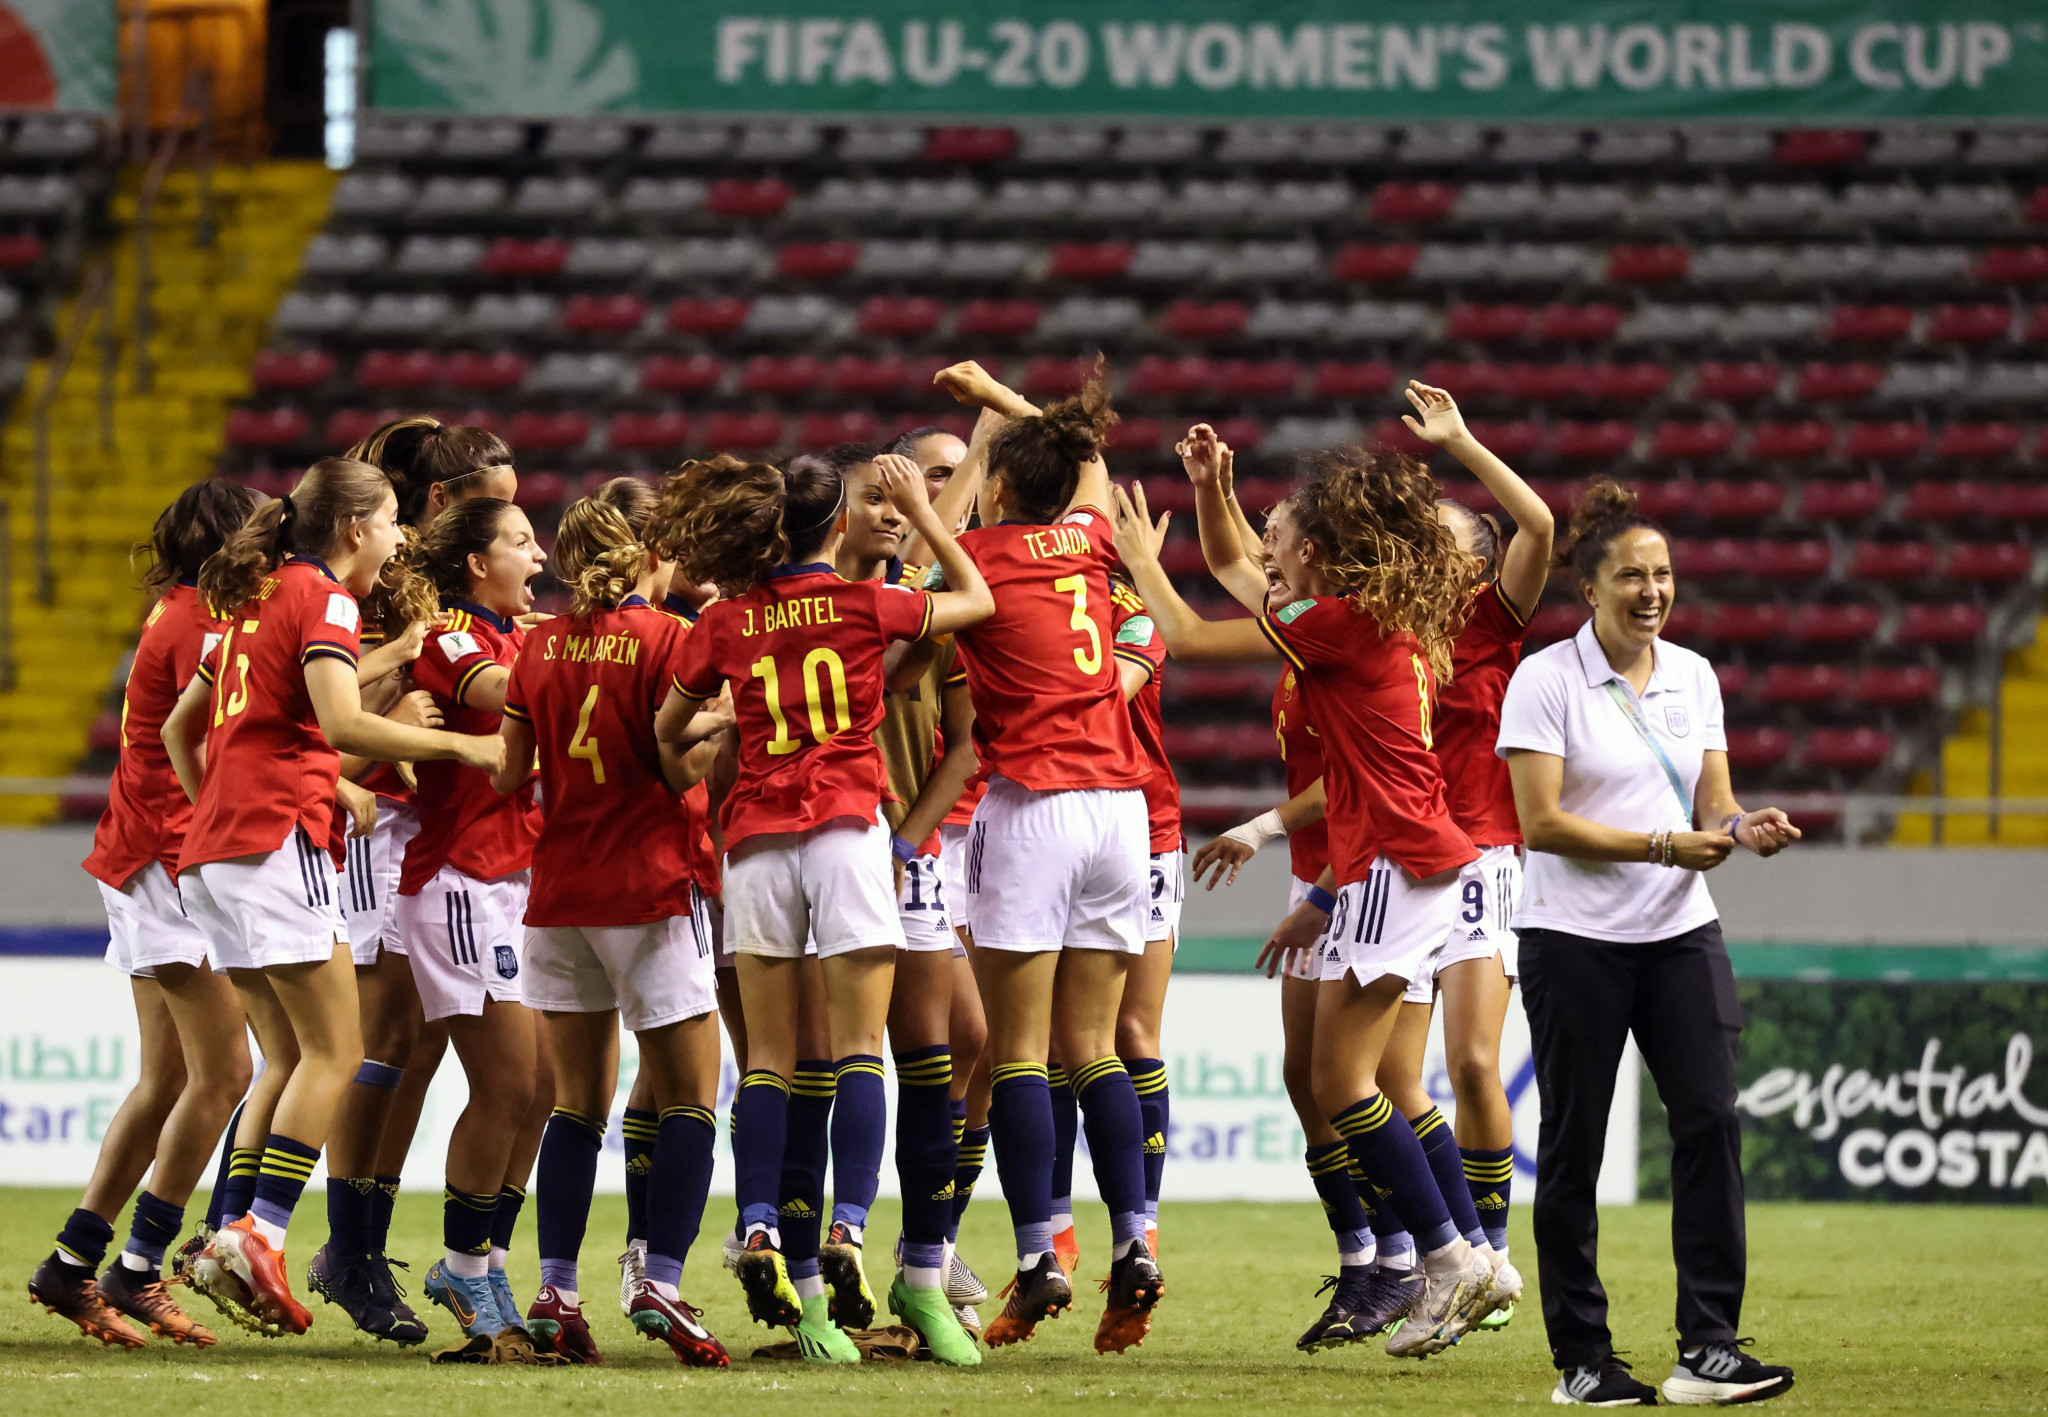 Spain get revenge against Japan to win FIFA Under-20 Women’s World Cup title